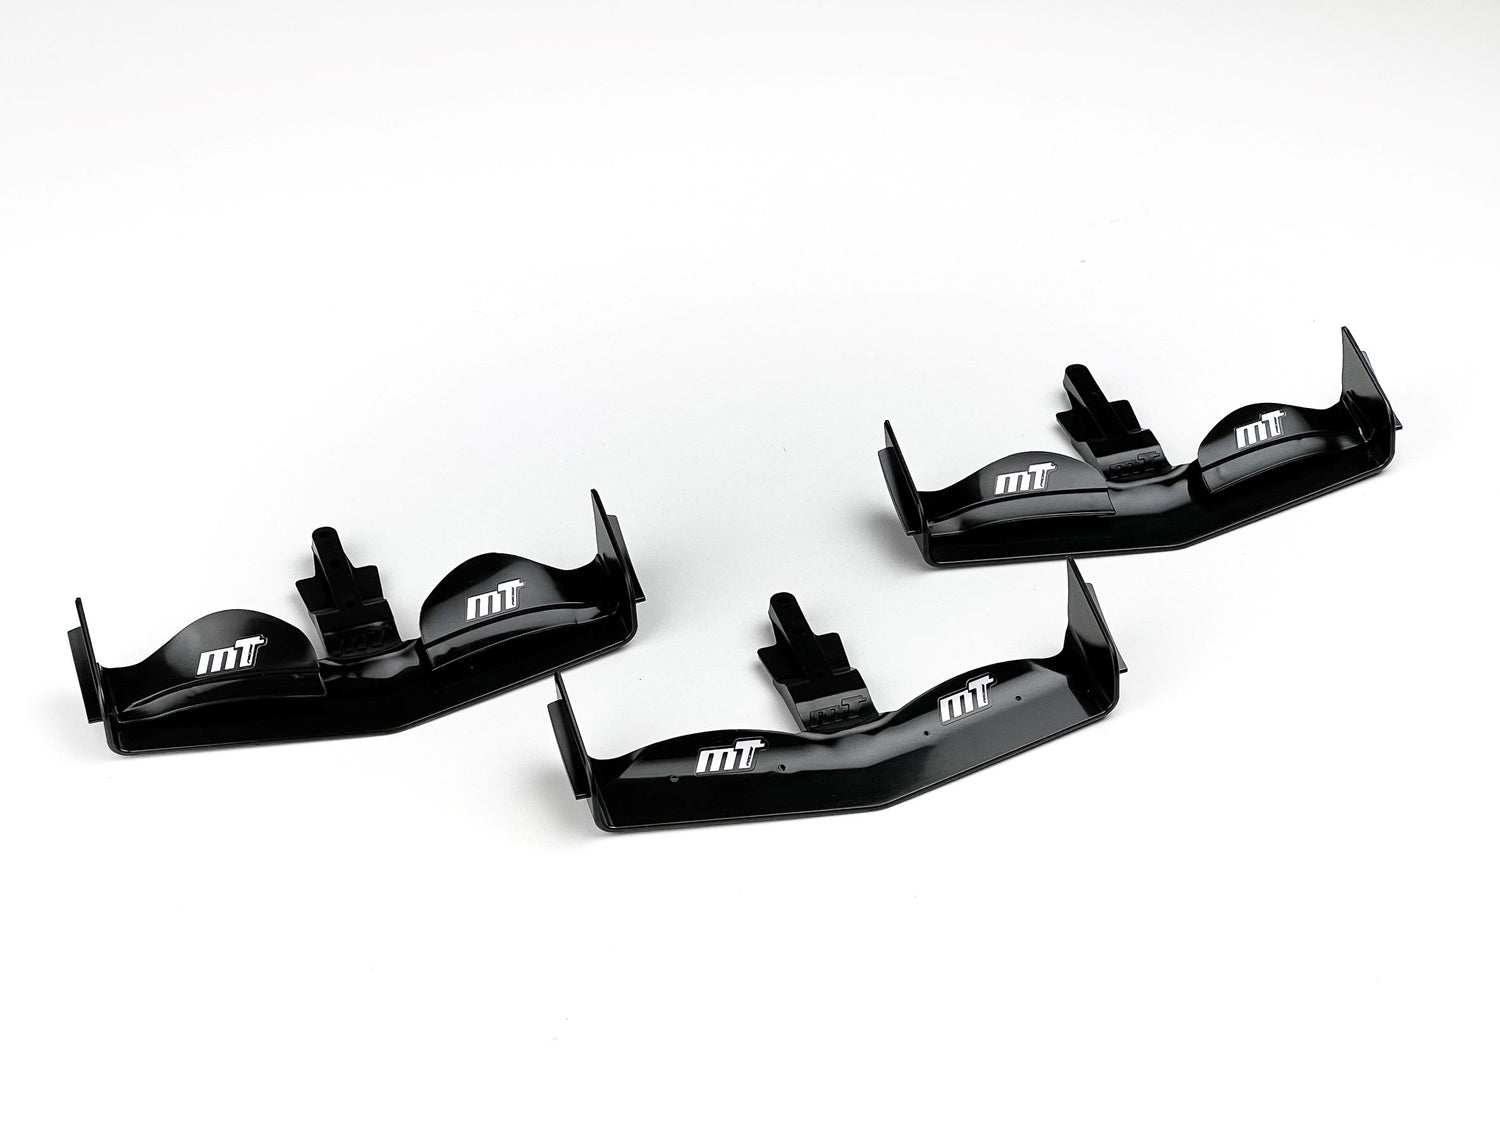 Mon-tech F1 2022 Front Wing